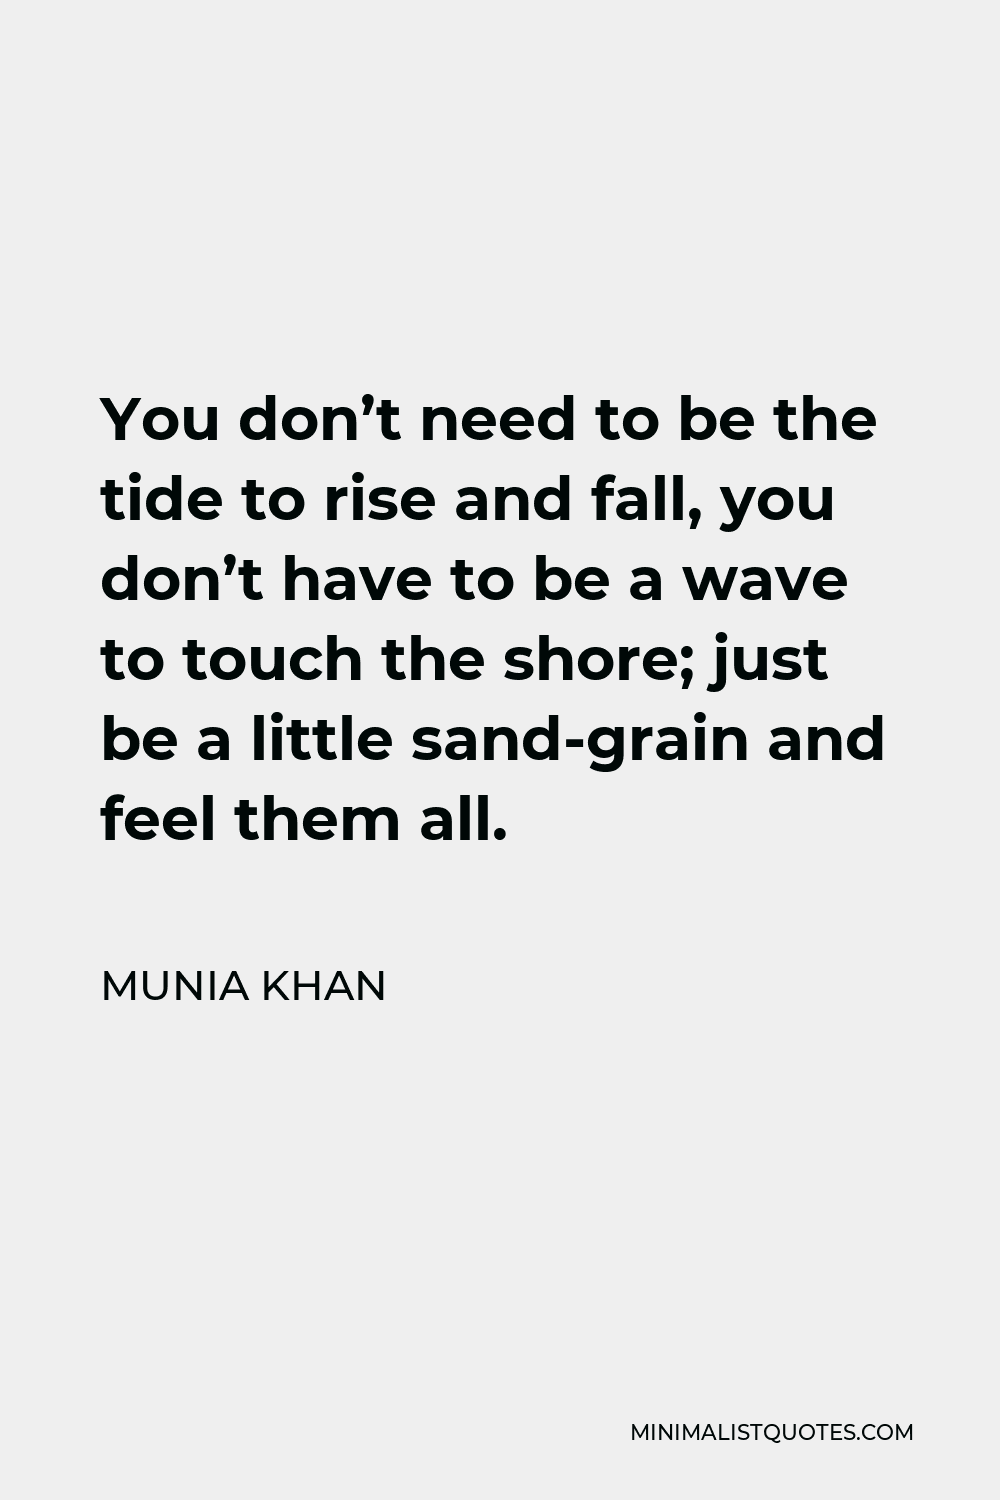 Munia Khan Quote - You don’t need to be the tide to rise and fall, you don’t have to be a wave to touch the shore; just be a little sand-grain and feel them all.